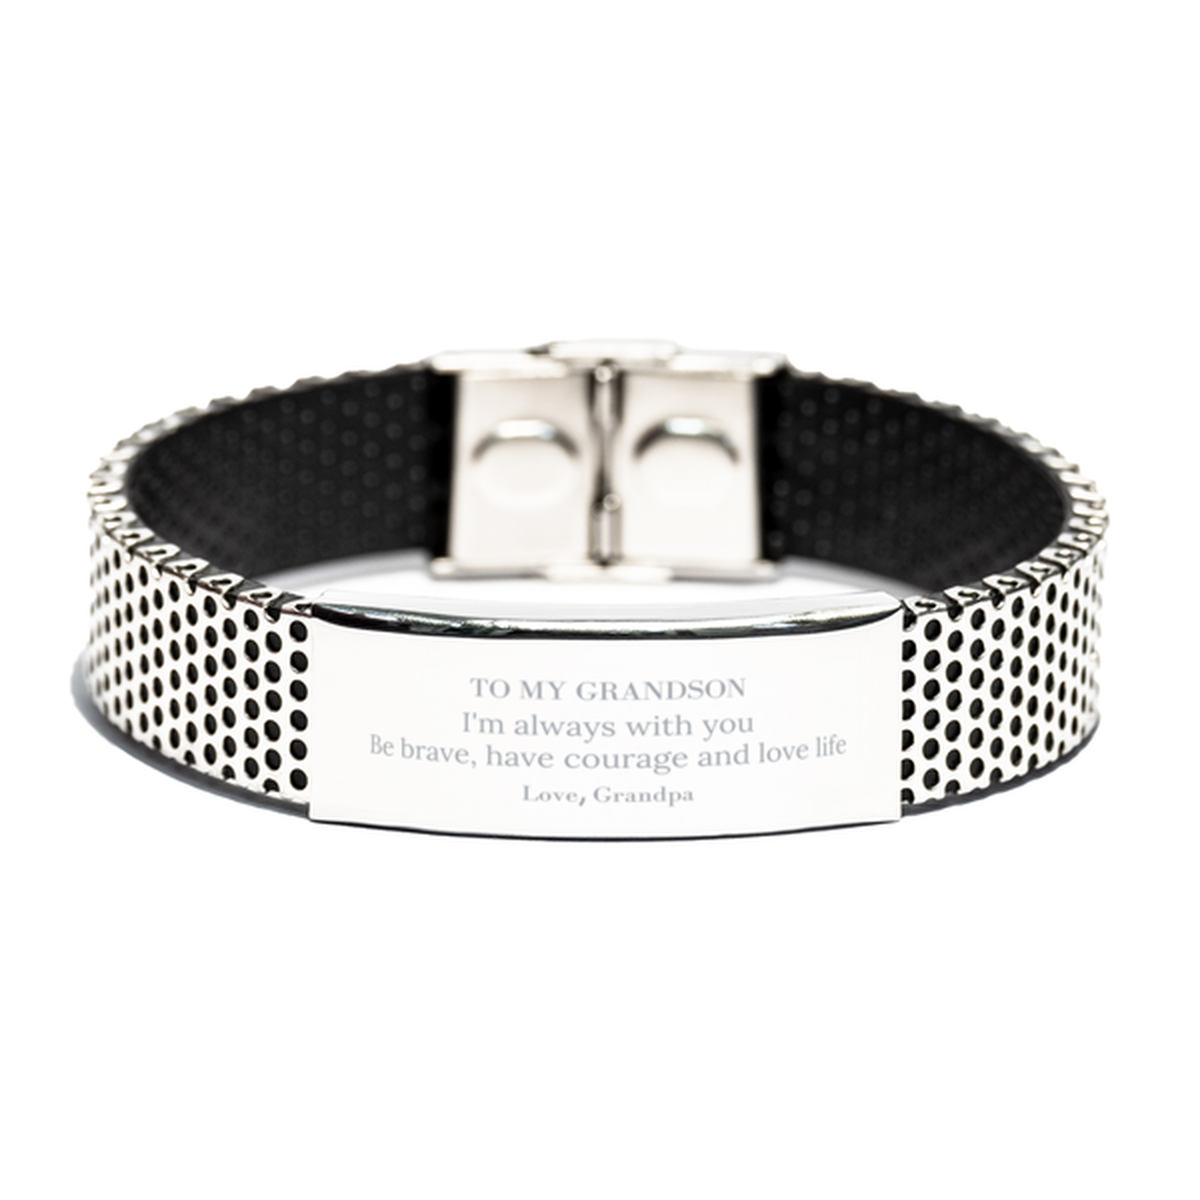 To My Grandson Gifts from Grandpa, Unique Stainless Steel Bracelet Inspirational Christmas Birthday Graduation Gifts for Grandson I'm always with you. Be brave, have courage and love life. Love, Grandpa